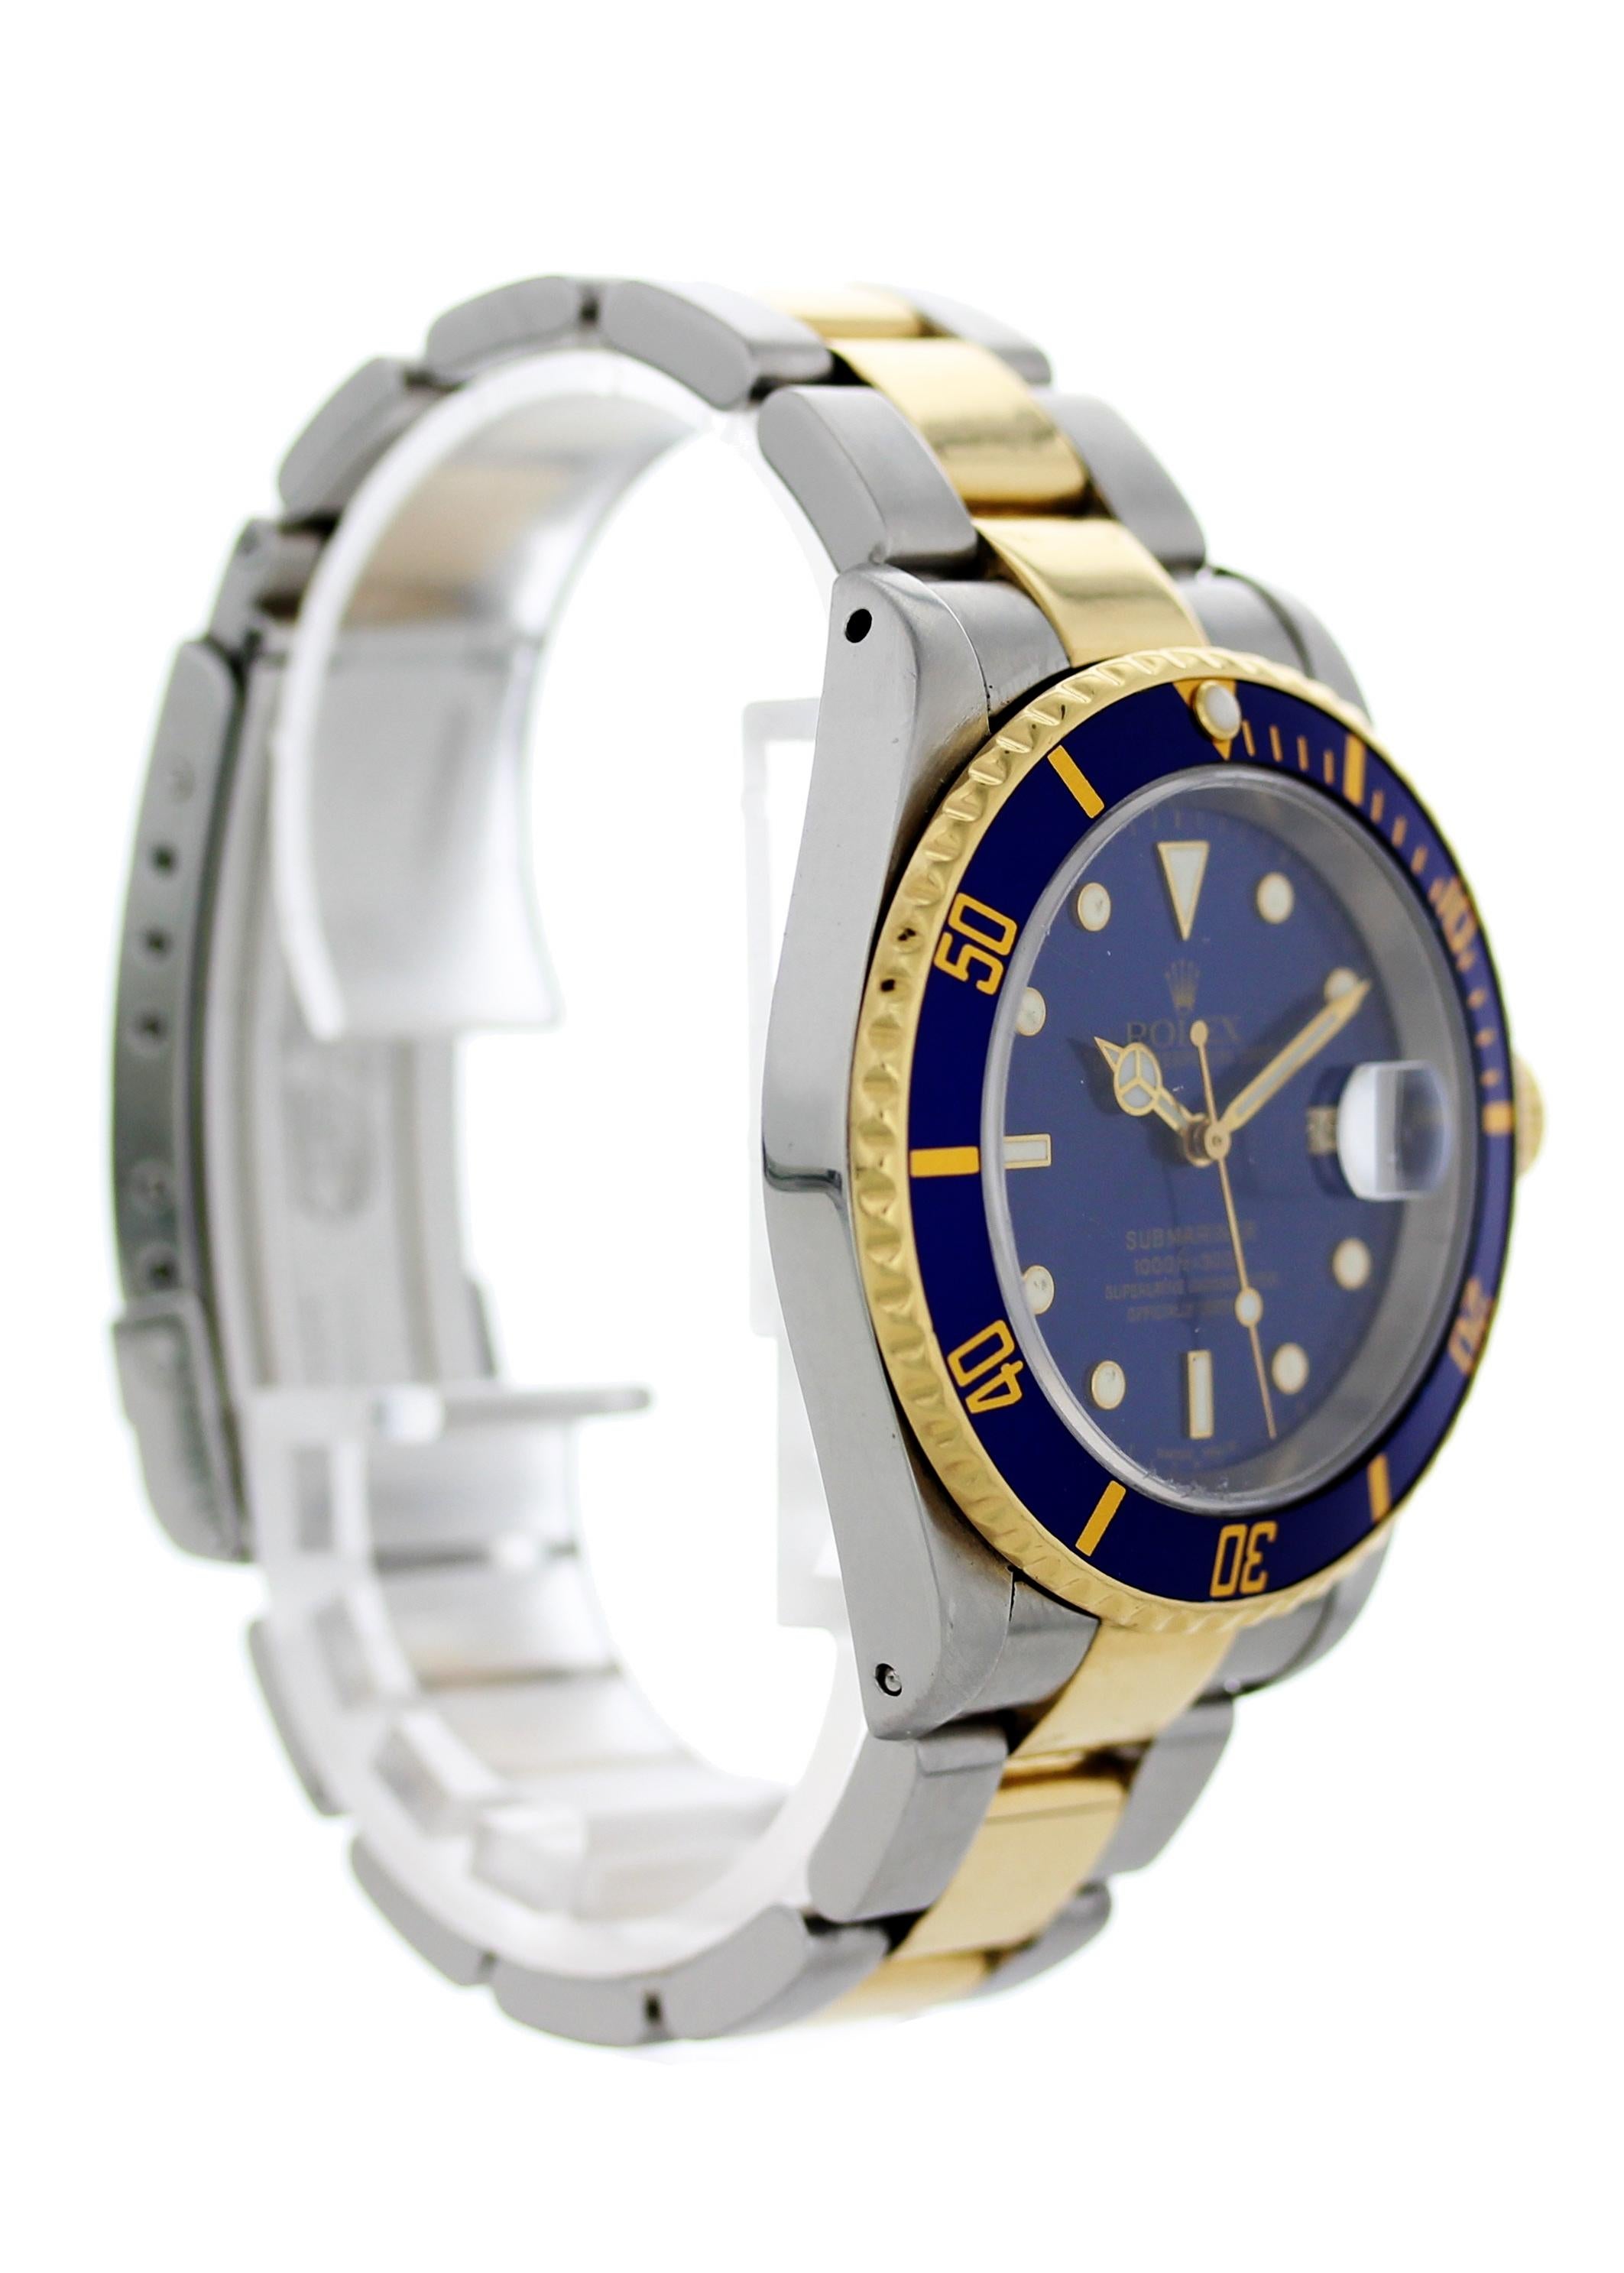 Rolex oyster perpetual Submariner Date 18k 16613 Mens Watch. 40mm Stainless steel case.18k yellow gold bezel with blue bezel insert. Blue dial with gold luminous hands and markers. 18k yellow gold and stainless steel Oyster band. Will fit up to a 7